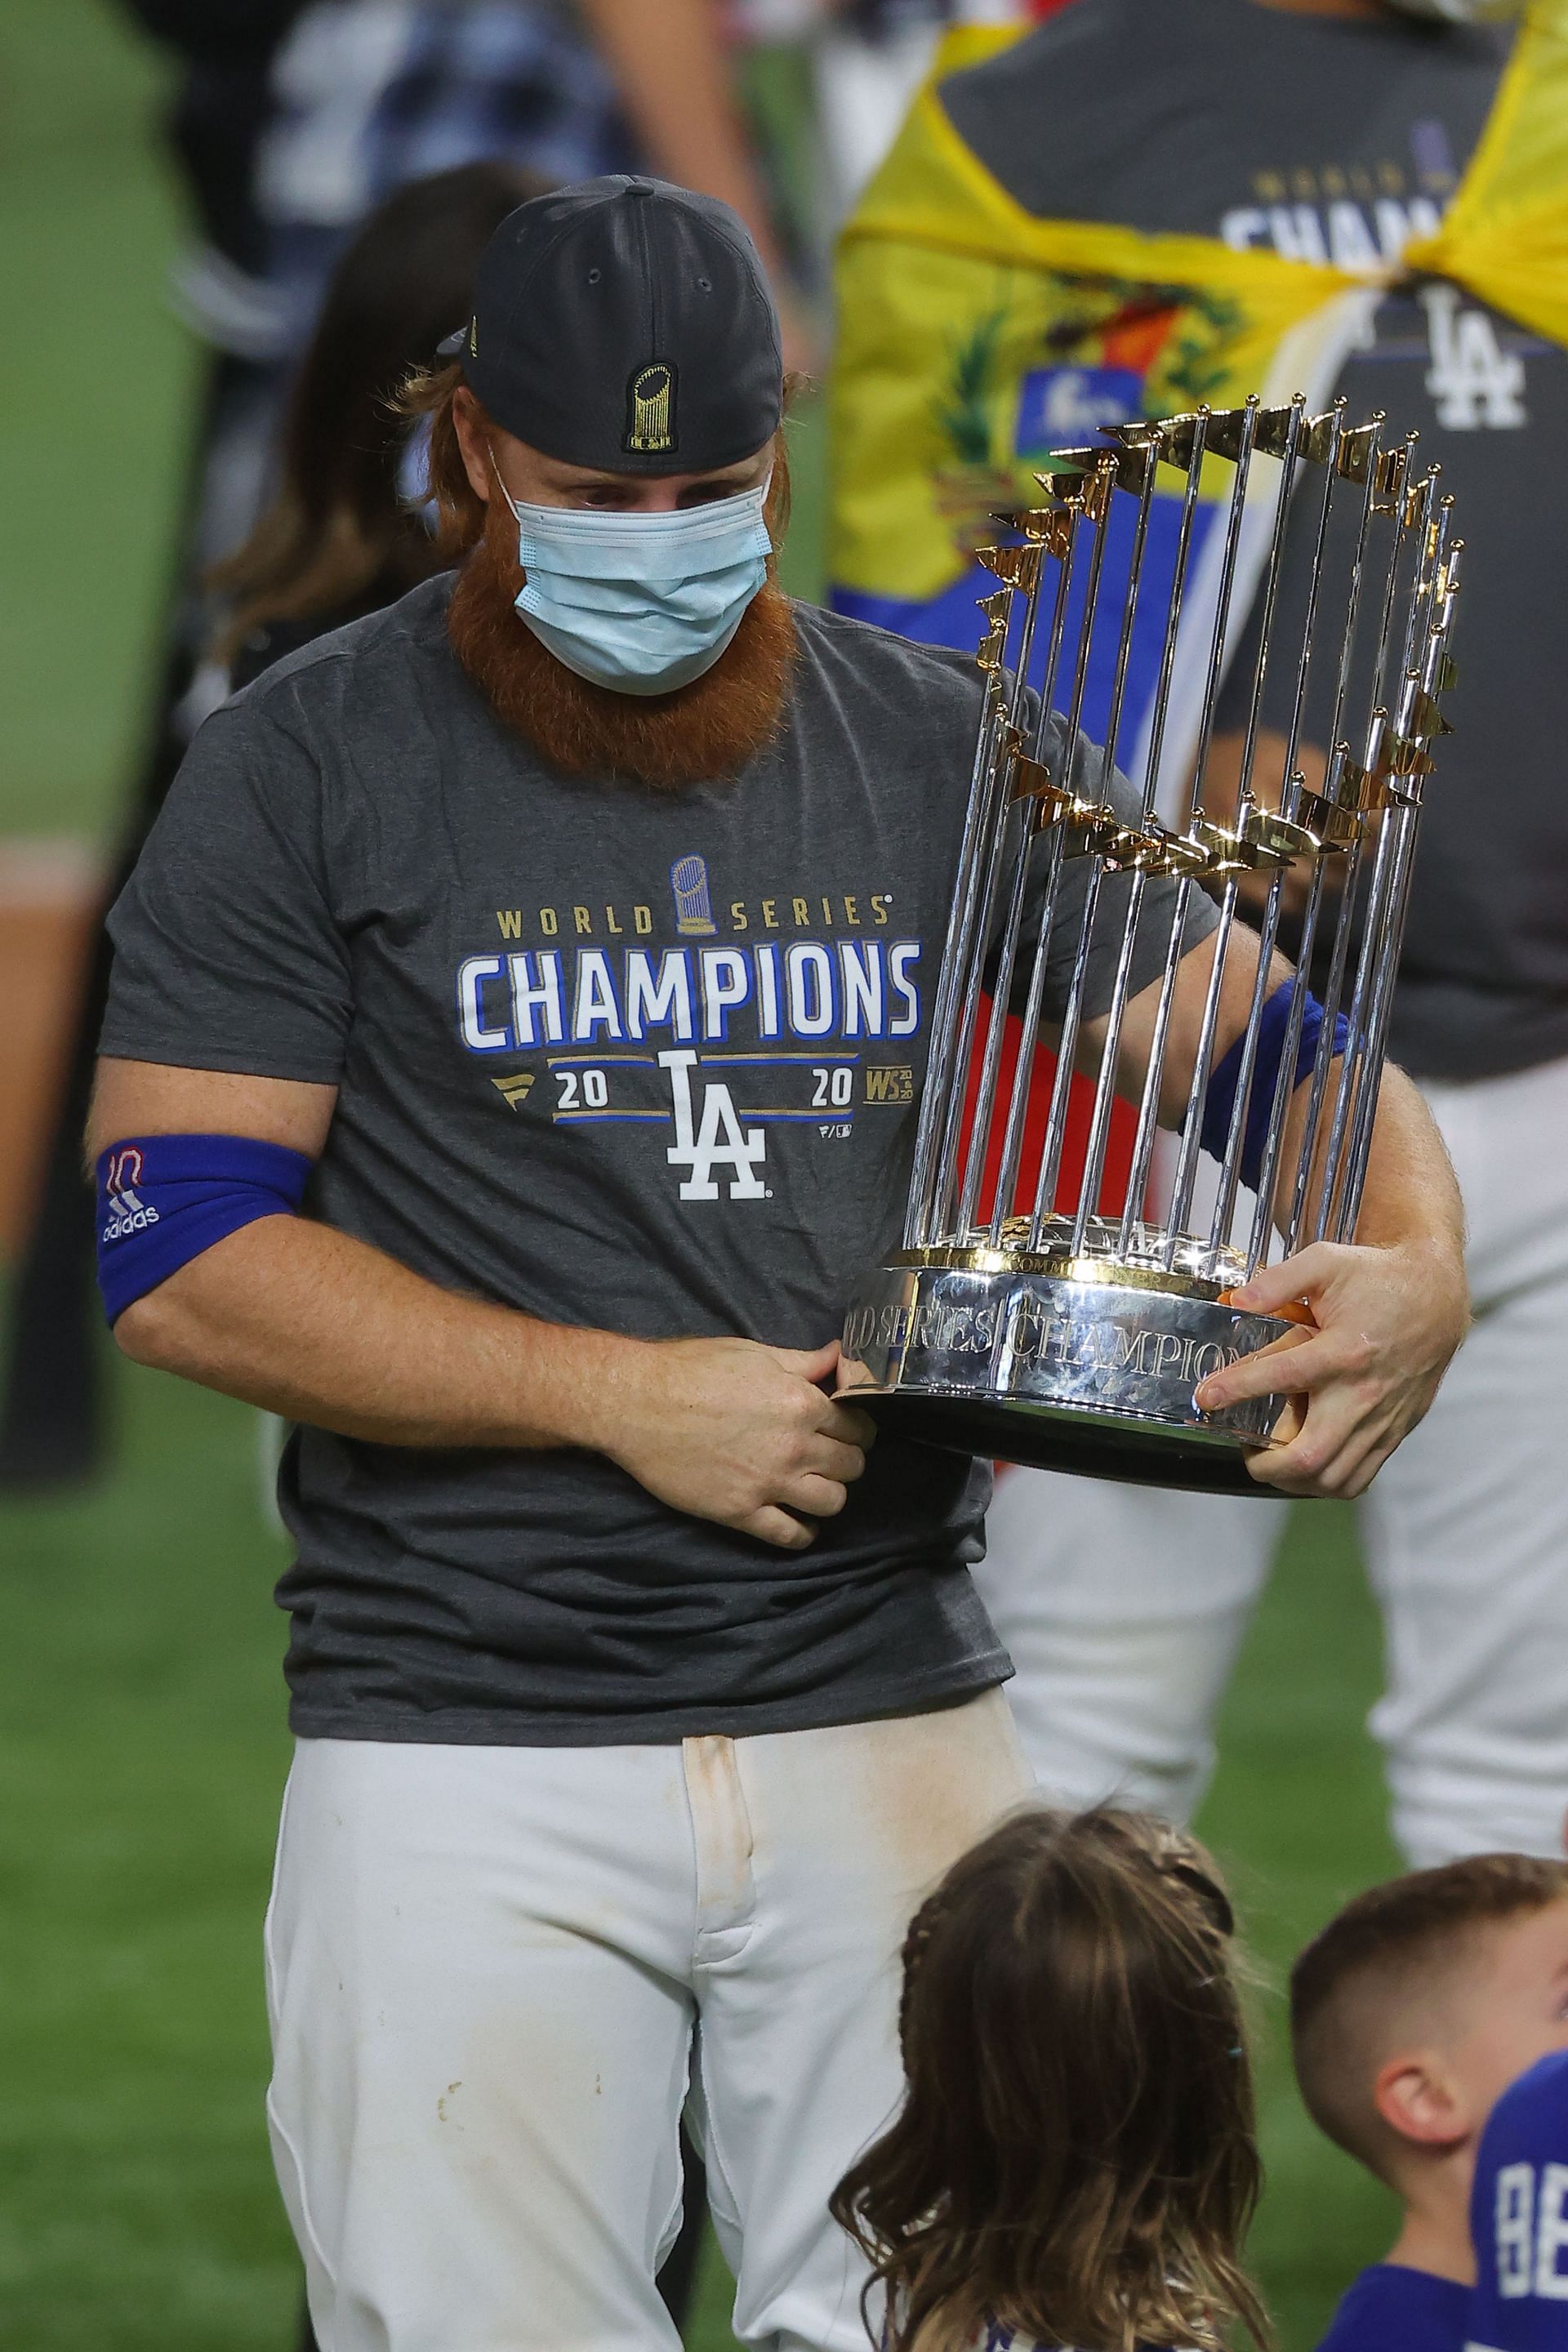 Justin Turner was a 2020 World Series champion with the LA Dodgers.